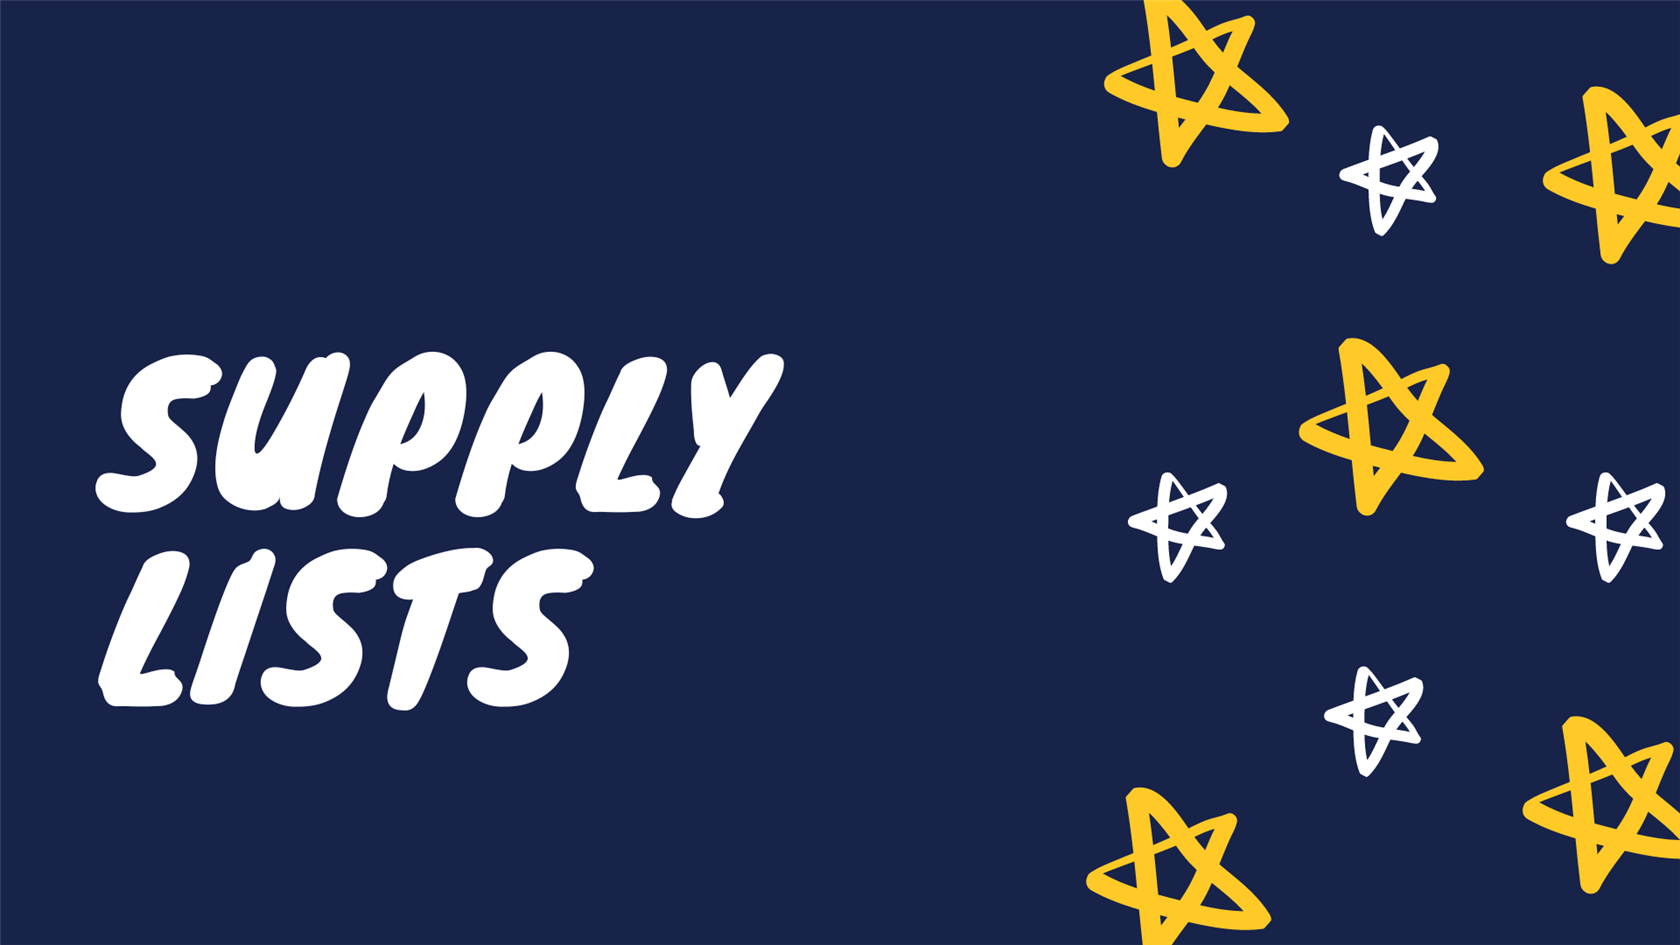  blue field with hand drawn white and yellow stars. "supply lists" in white.